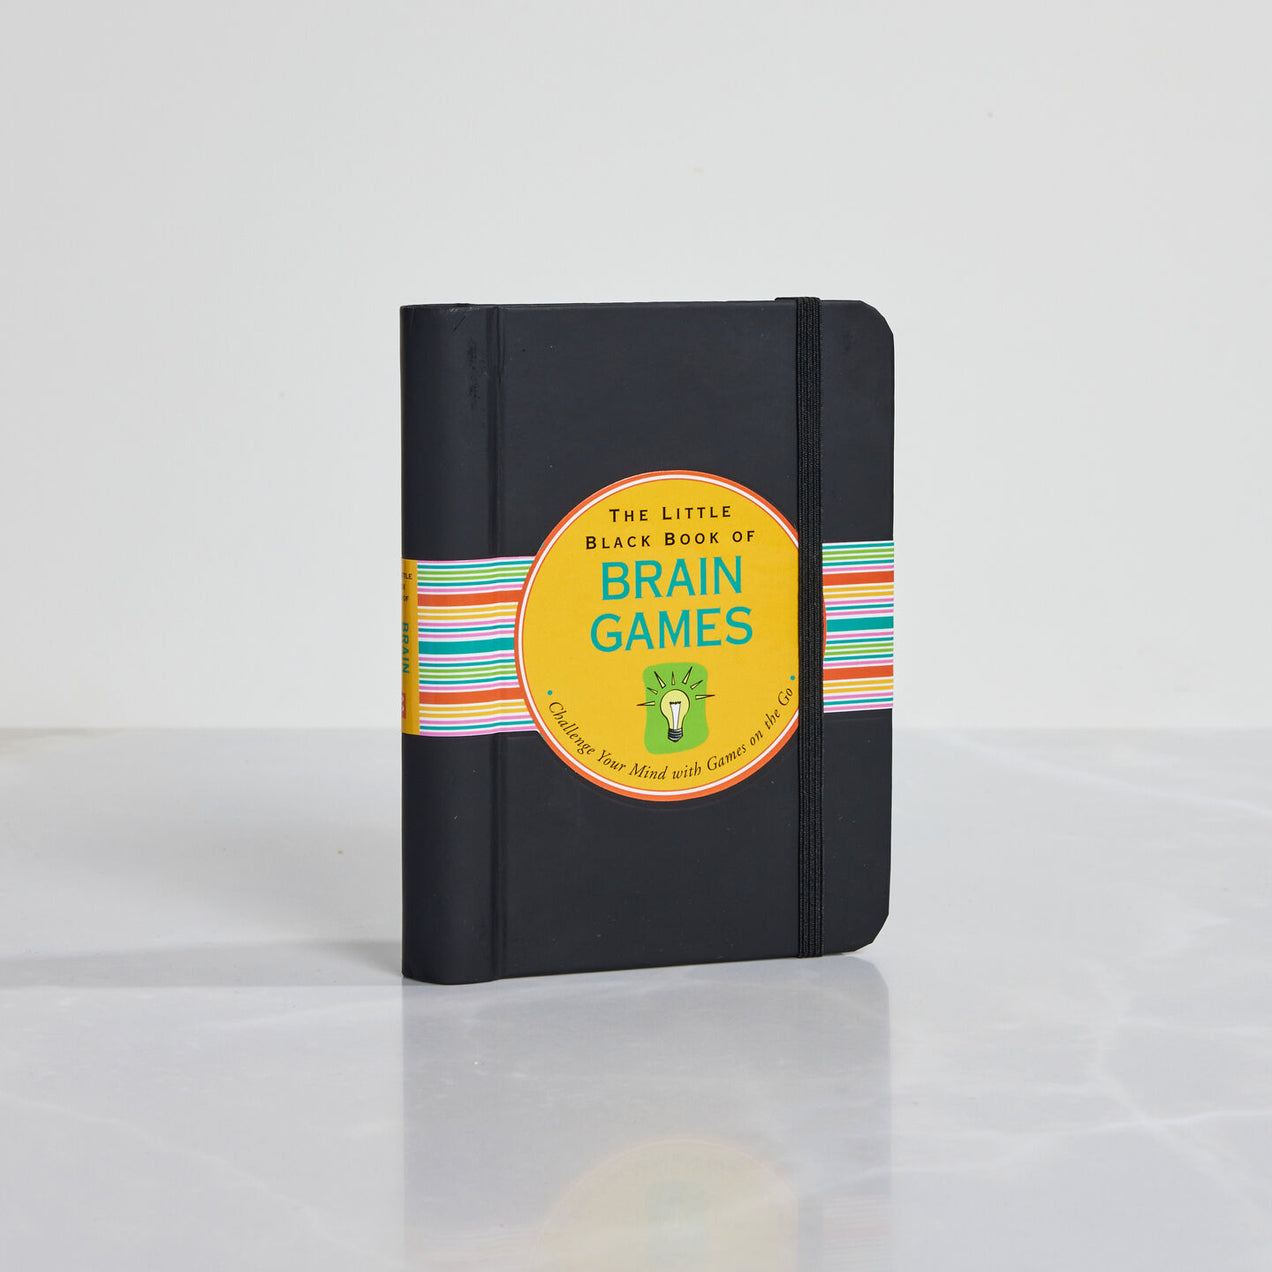 The Little Black Book of Brain Games product images